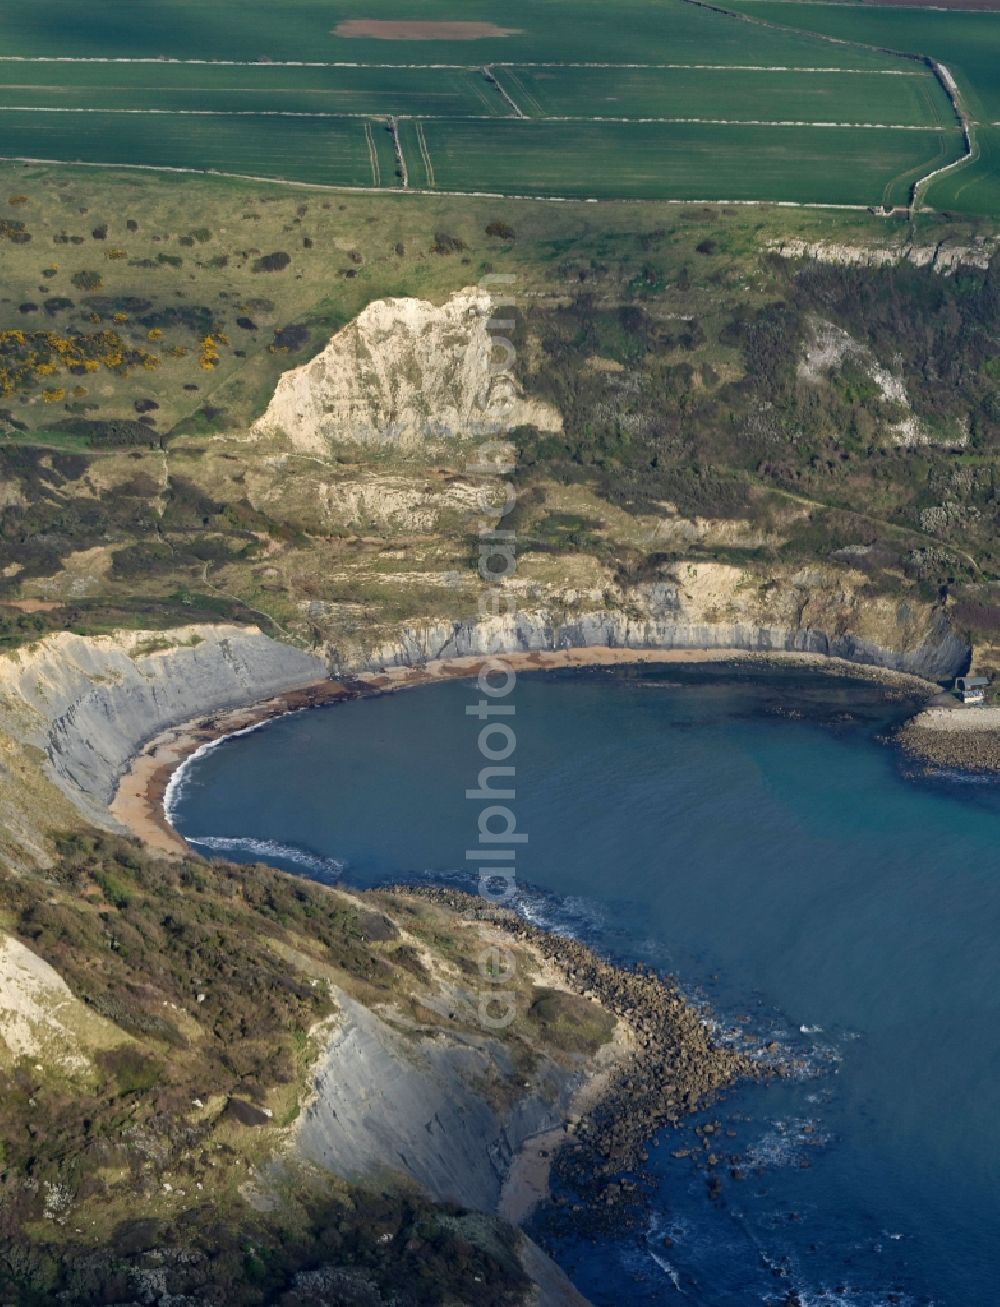 Worth Matravers from above - Water surface at the bay along the sea coast of English Channel Chapman's Pool in Worth Matravers in England, United Kingdom